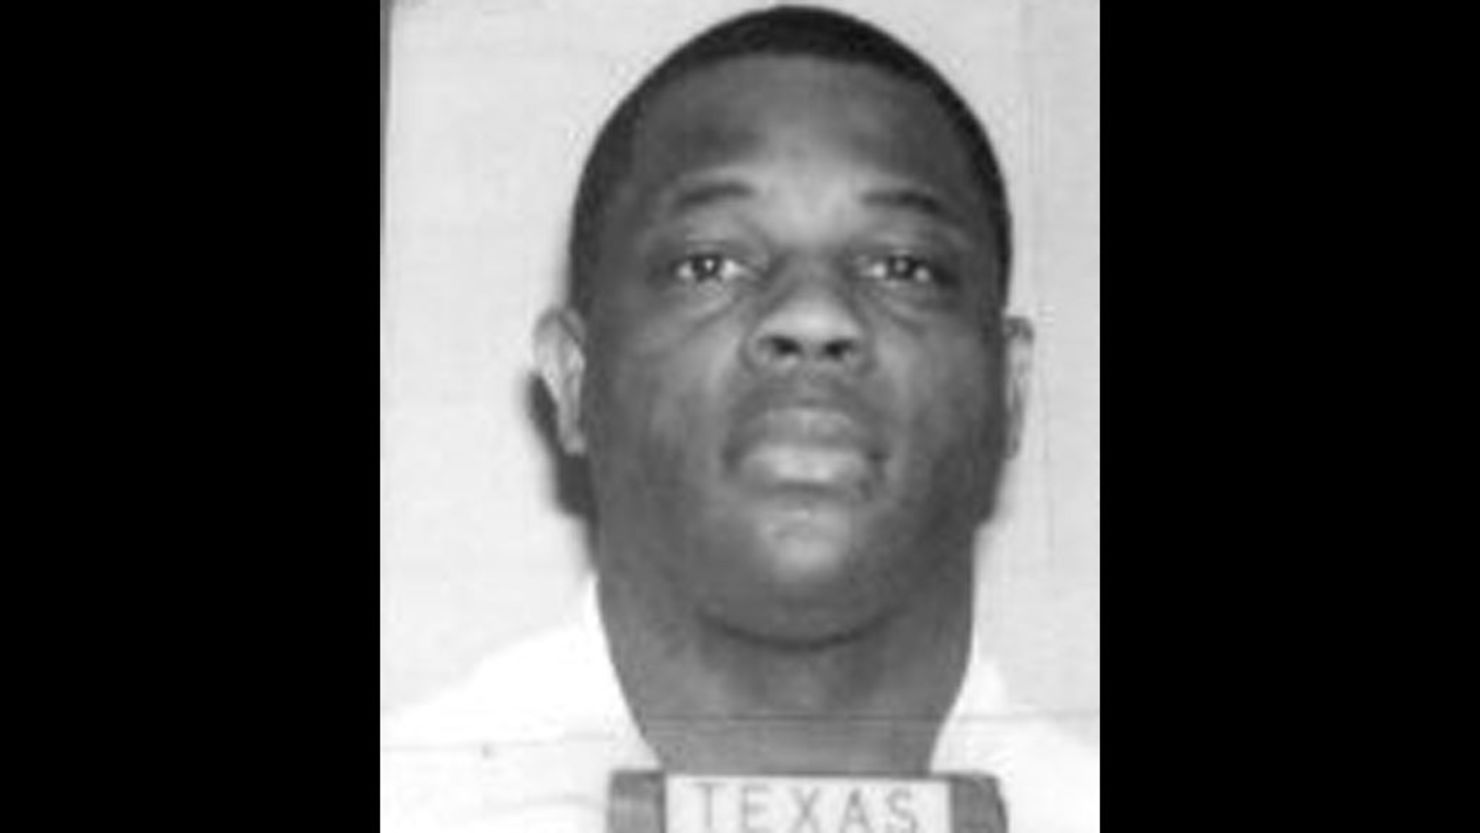 Marvin Wilson was executed in Texas on Tuesday for the shooting death of a 21-year-old male in 1992. His IQ measured at 61.